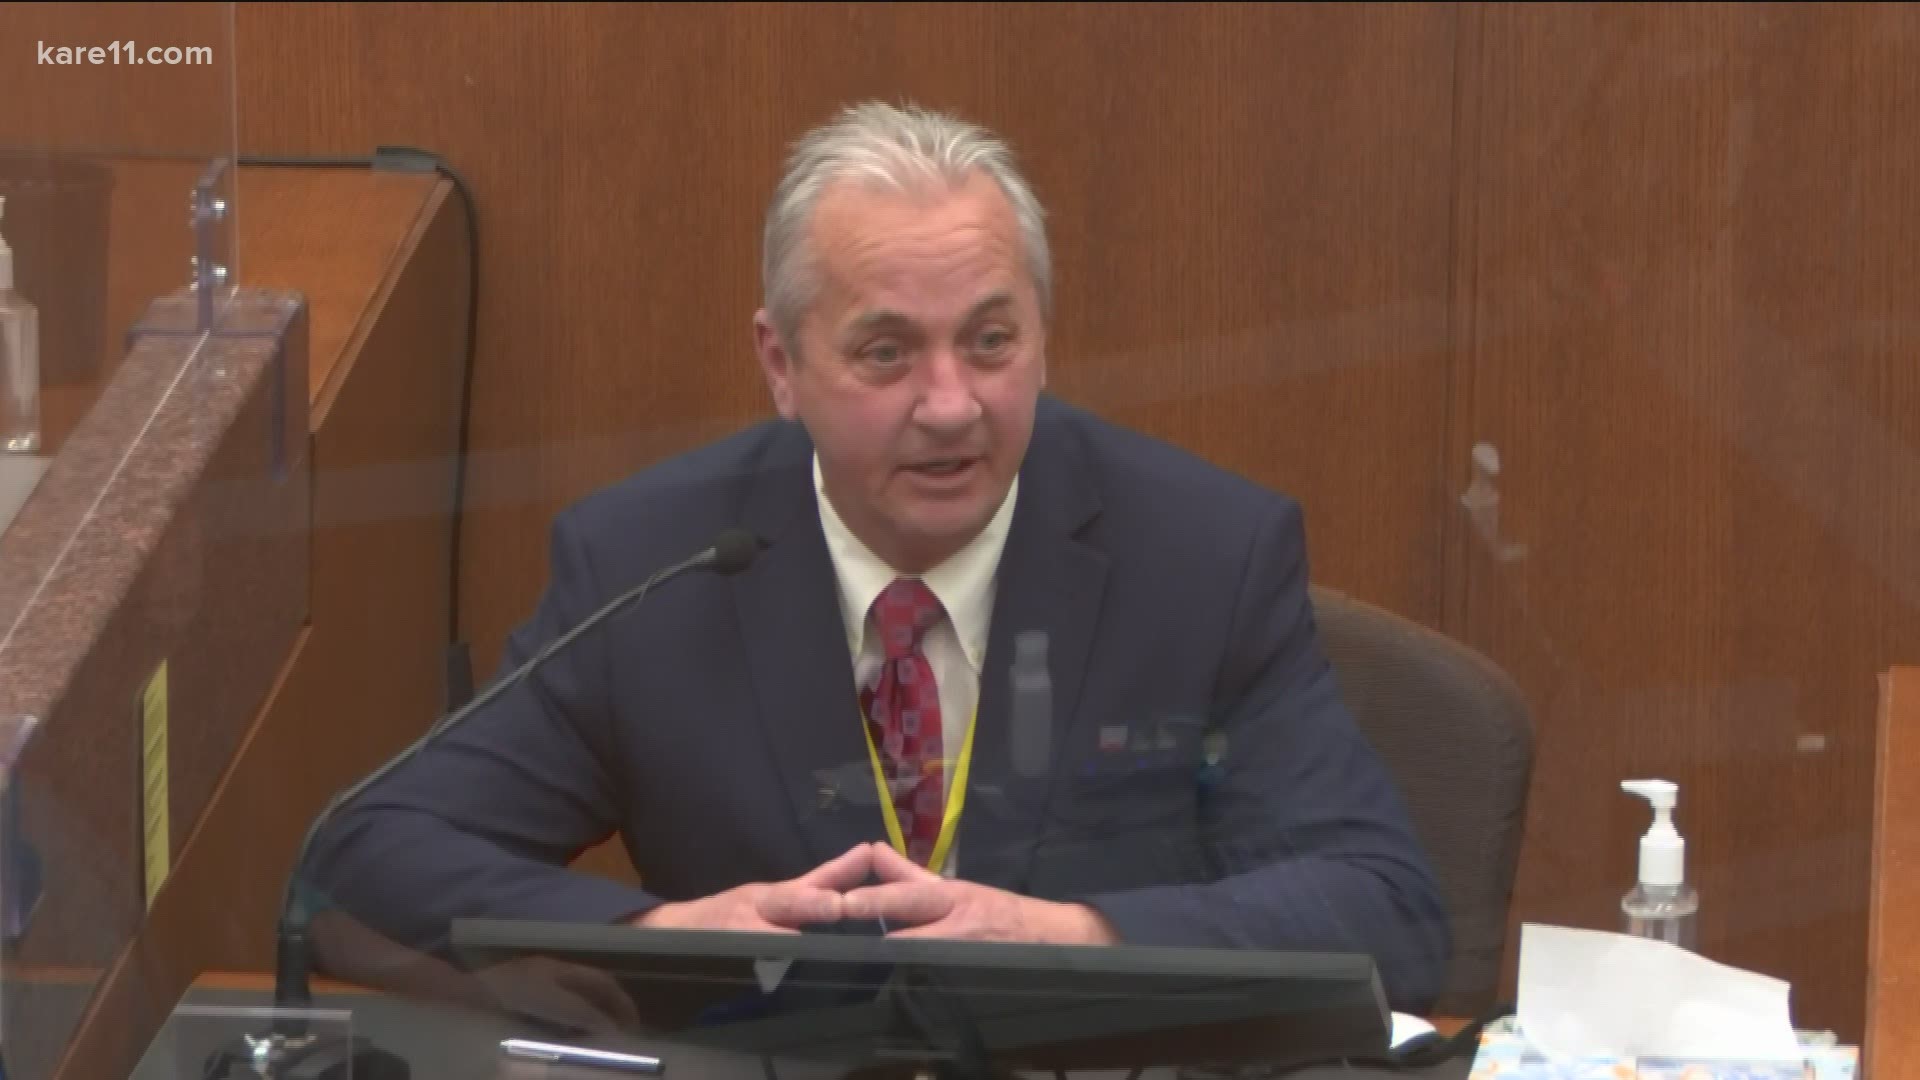 Lt. Richard Zimmerman, the head of MPD's homicide unit, testified that Chauvin's use of force and the length of time his knee was on Floyd's neck was "uncalled for."